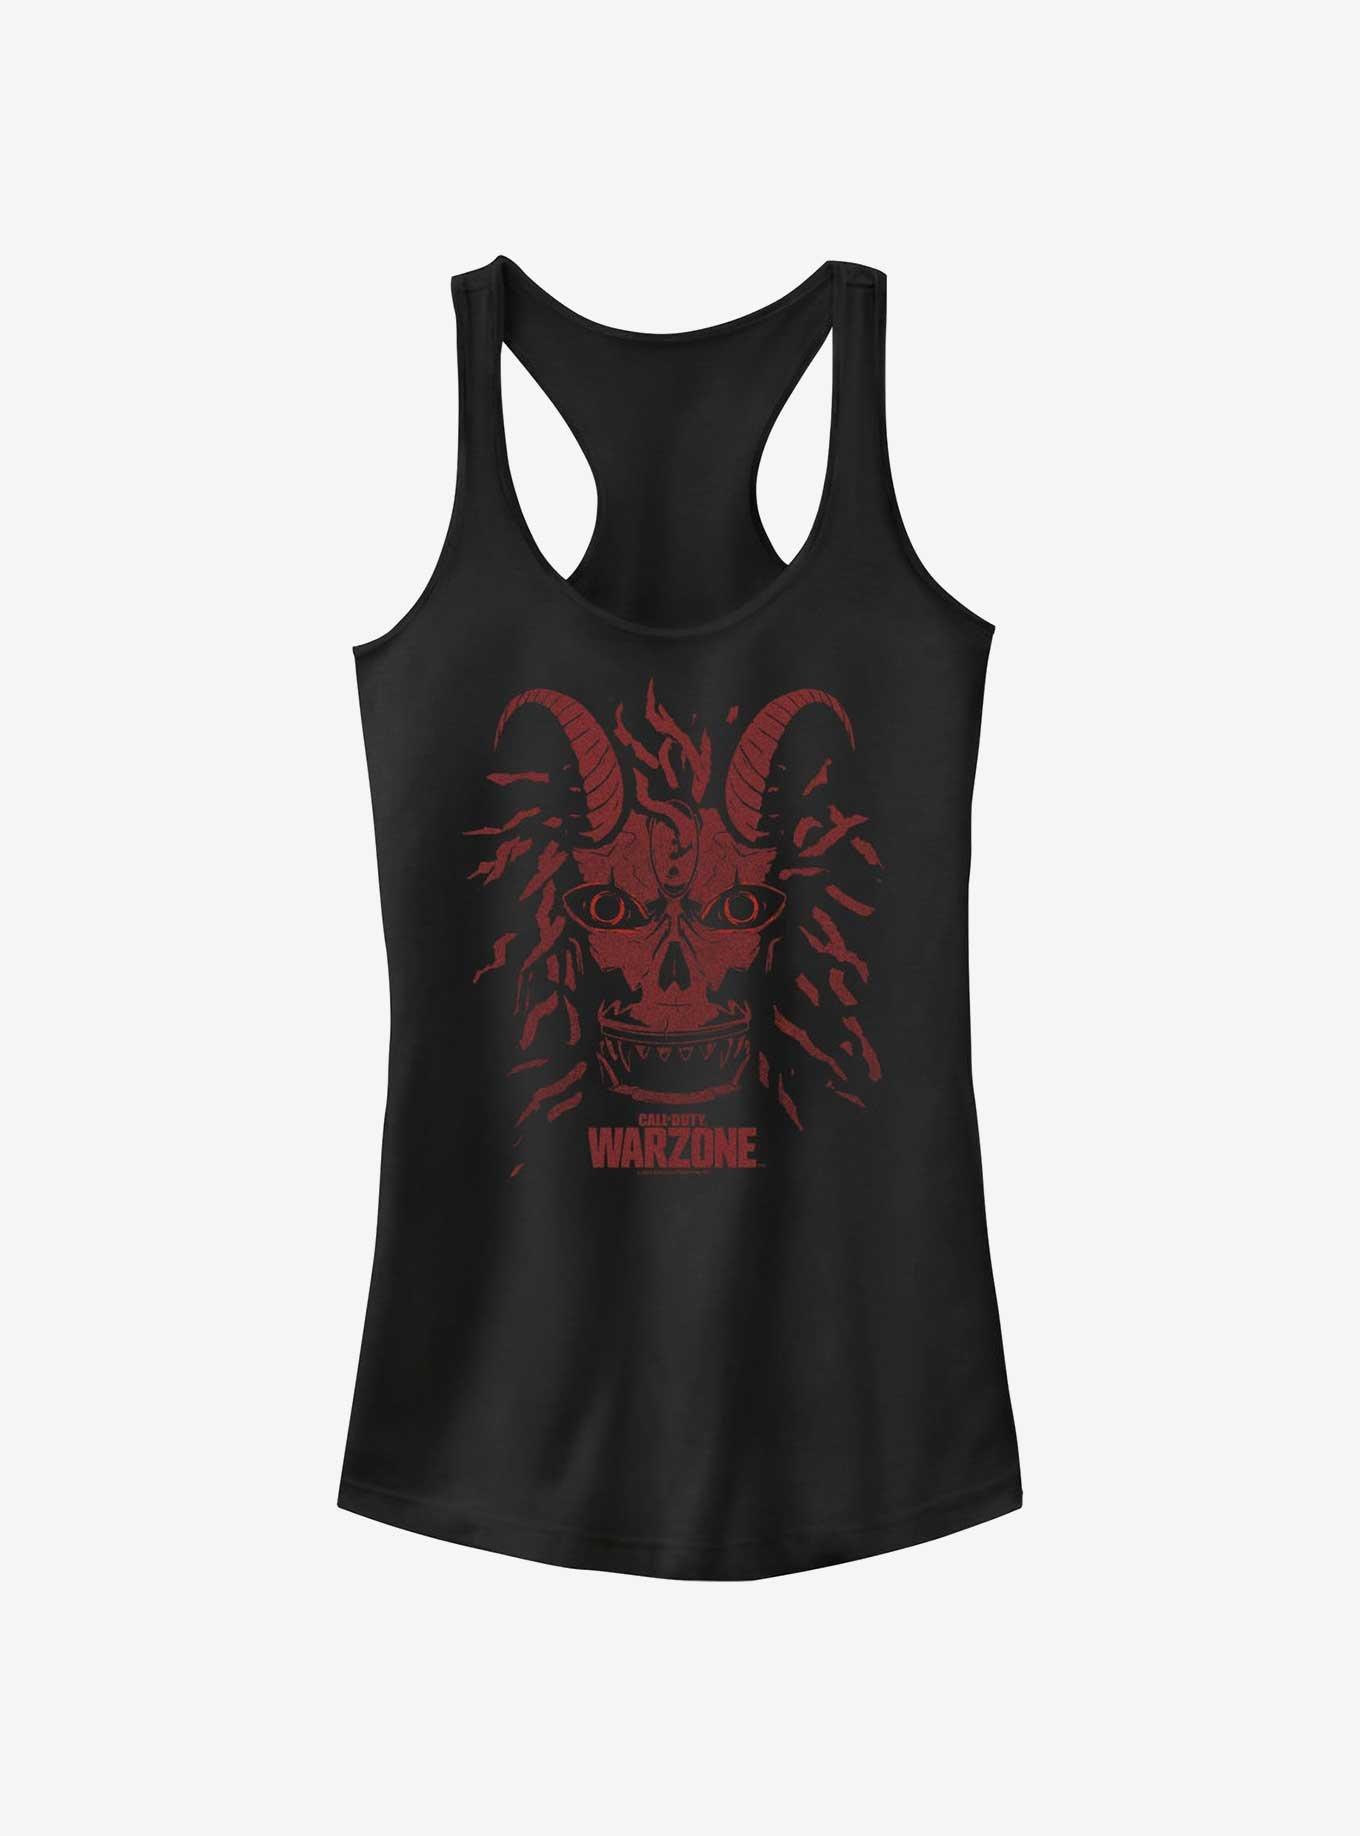 Call of Duty: Warzone Night Fang Red Mask Girls Tank, BLACK, hi-res